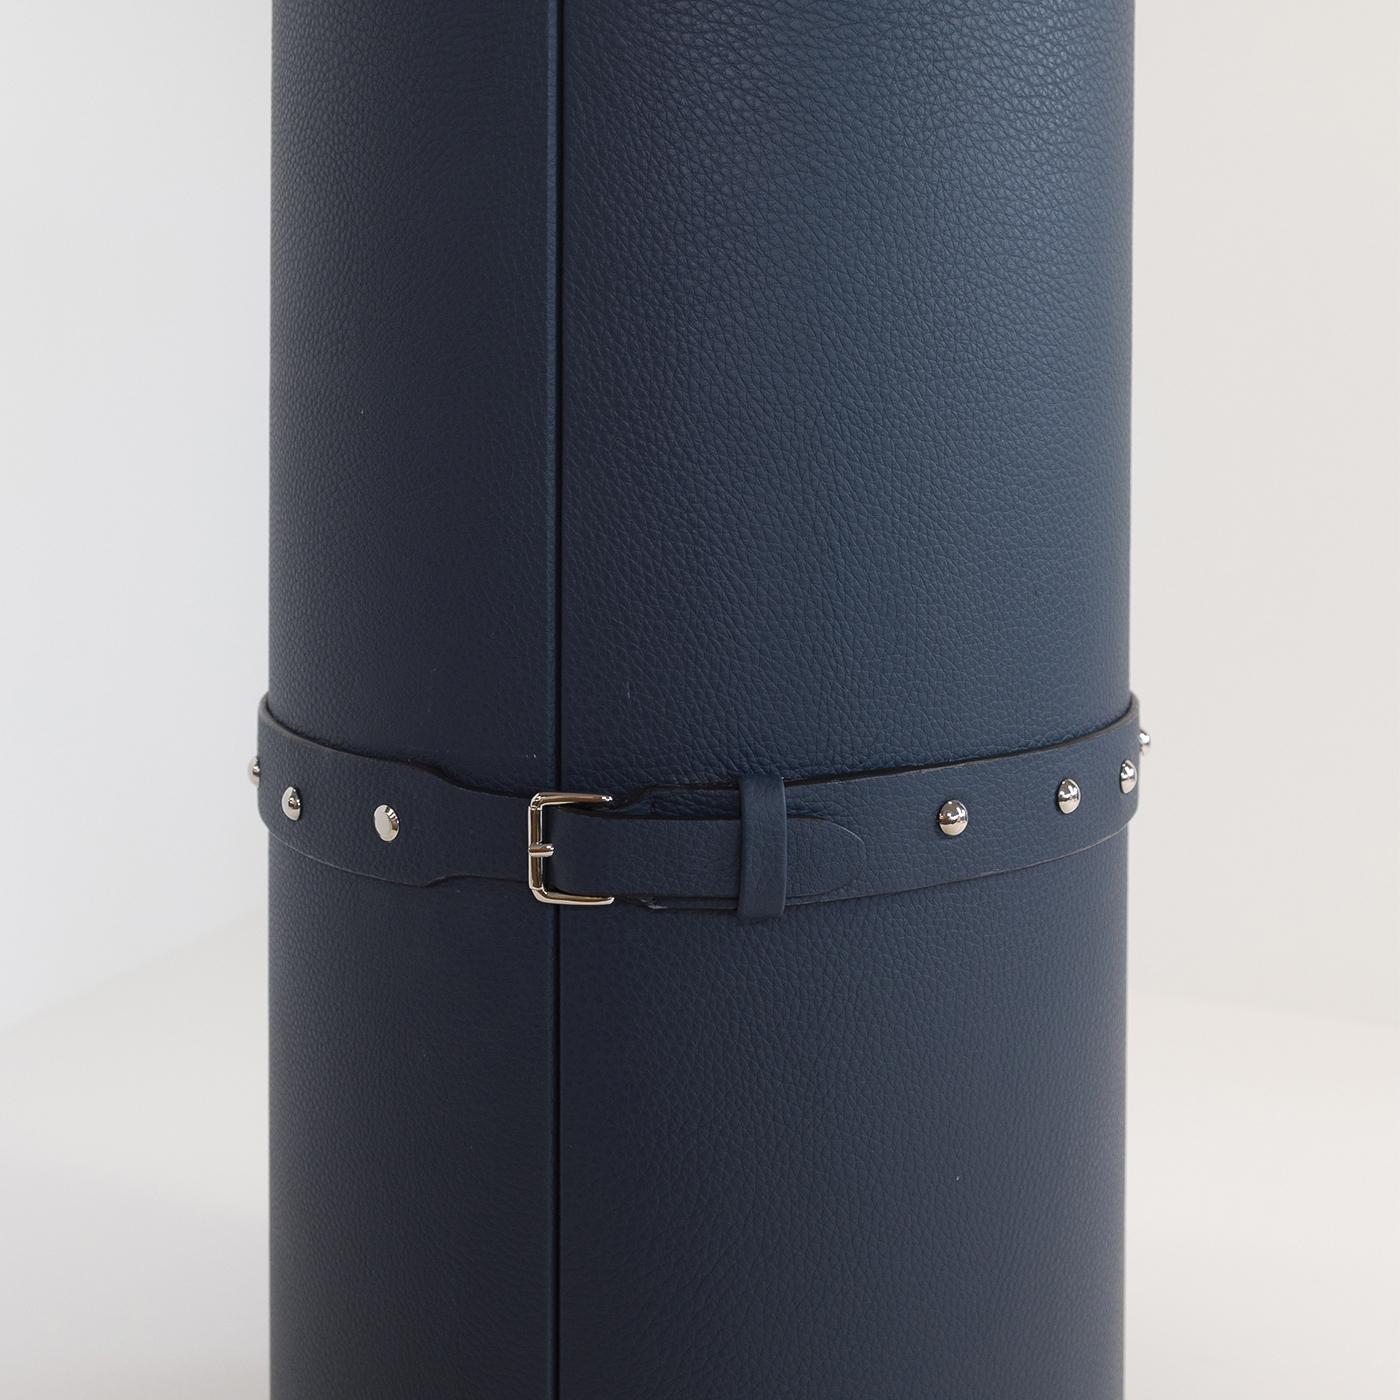 This beautiful yet practical cylindrical wine box is covered in fine, full-grain leather and is completely handmade. Genuine Alcantara lining on the inside of the box and metal detailing and a buckle closing on the outside complete the look of this